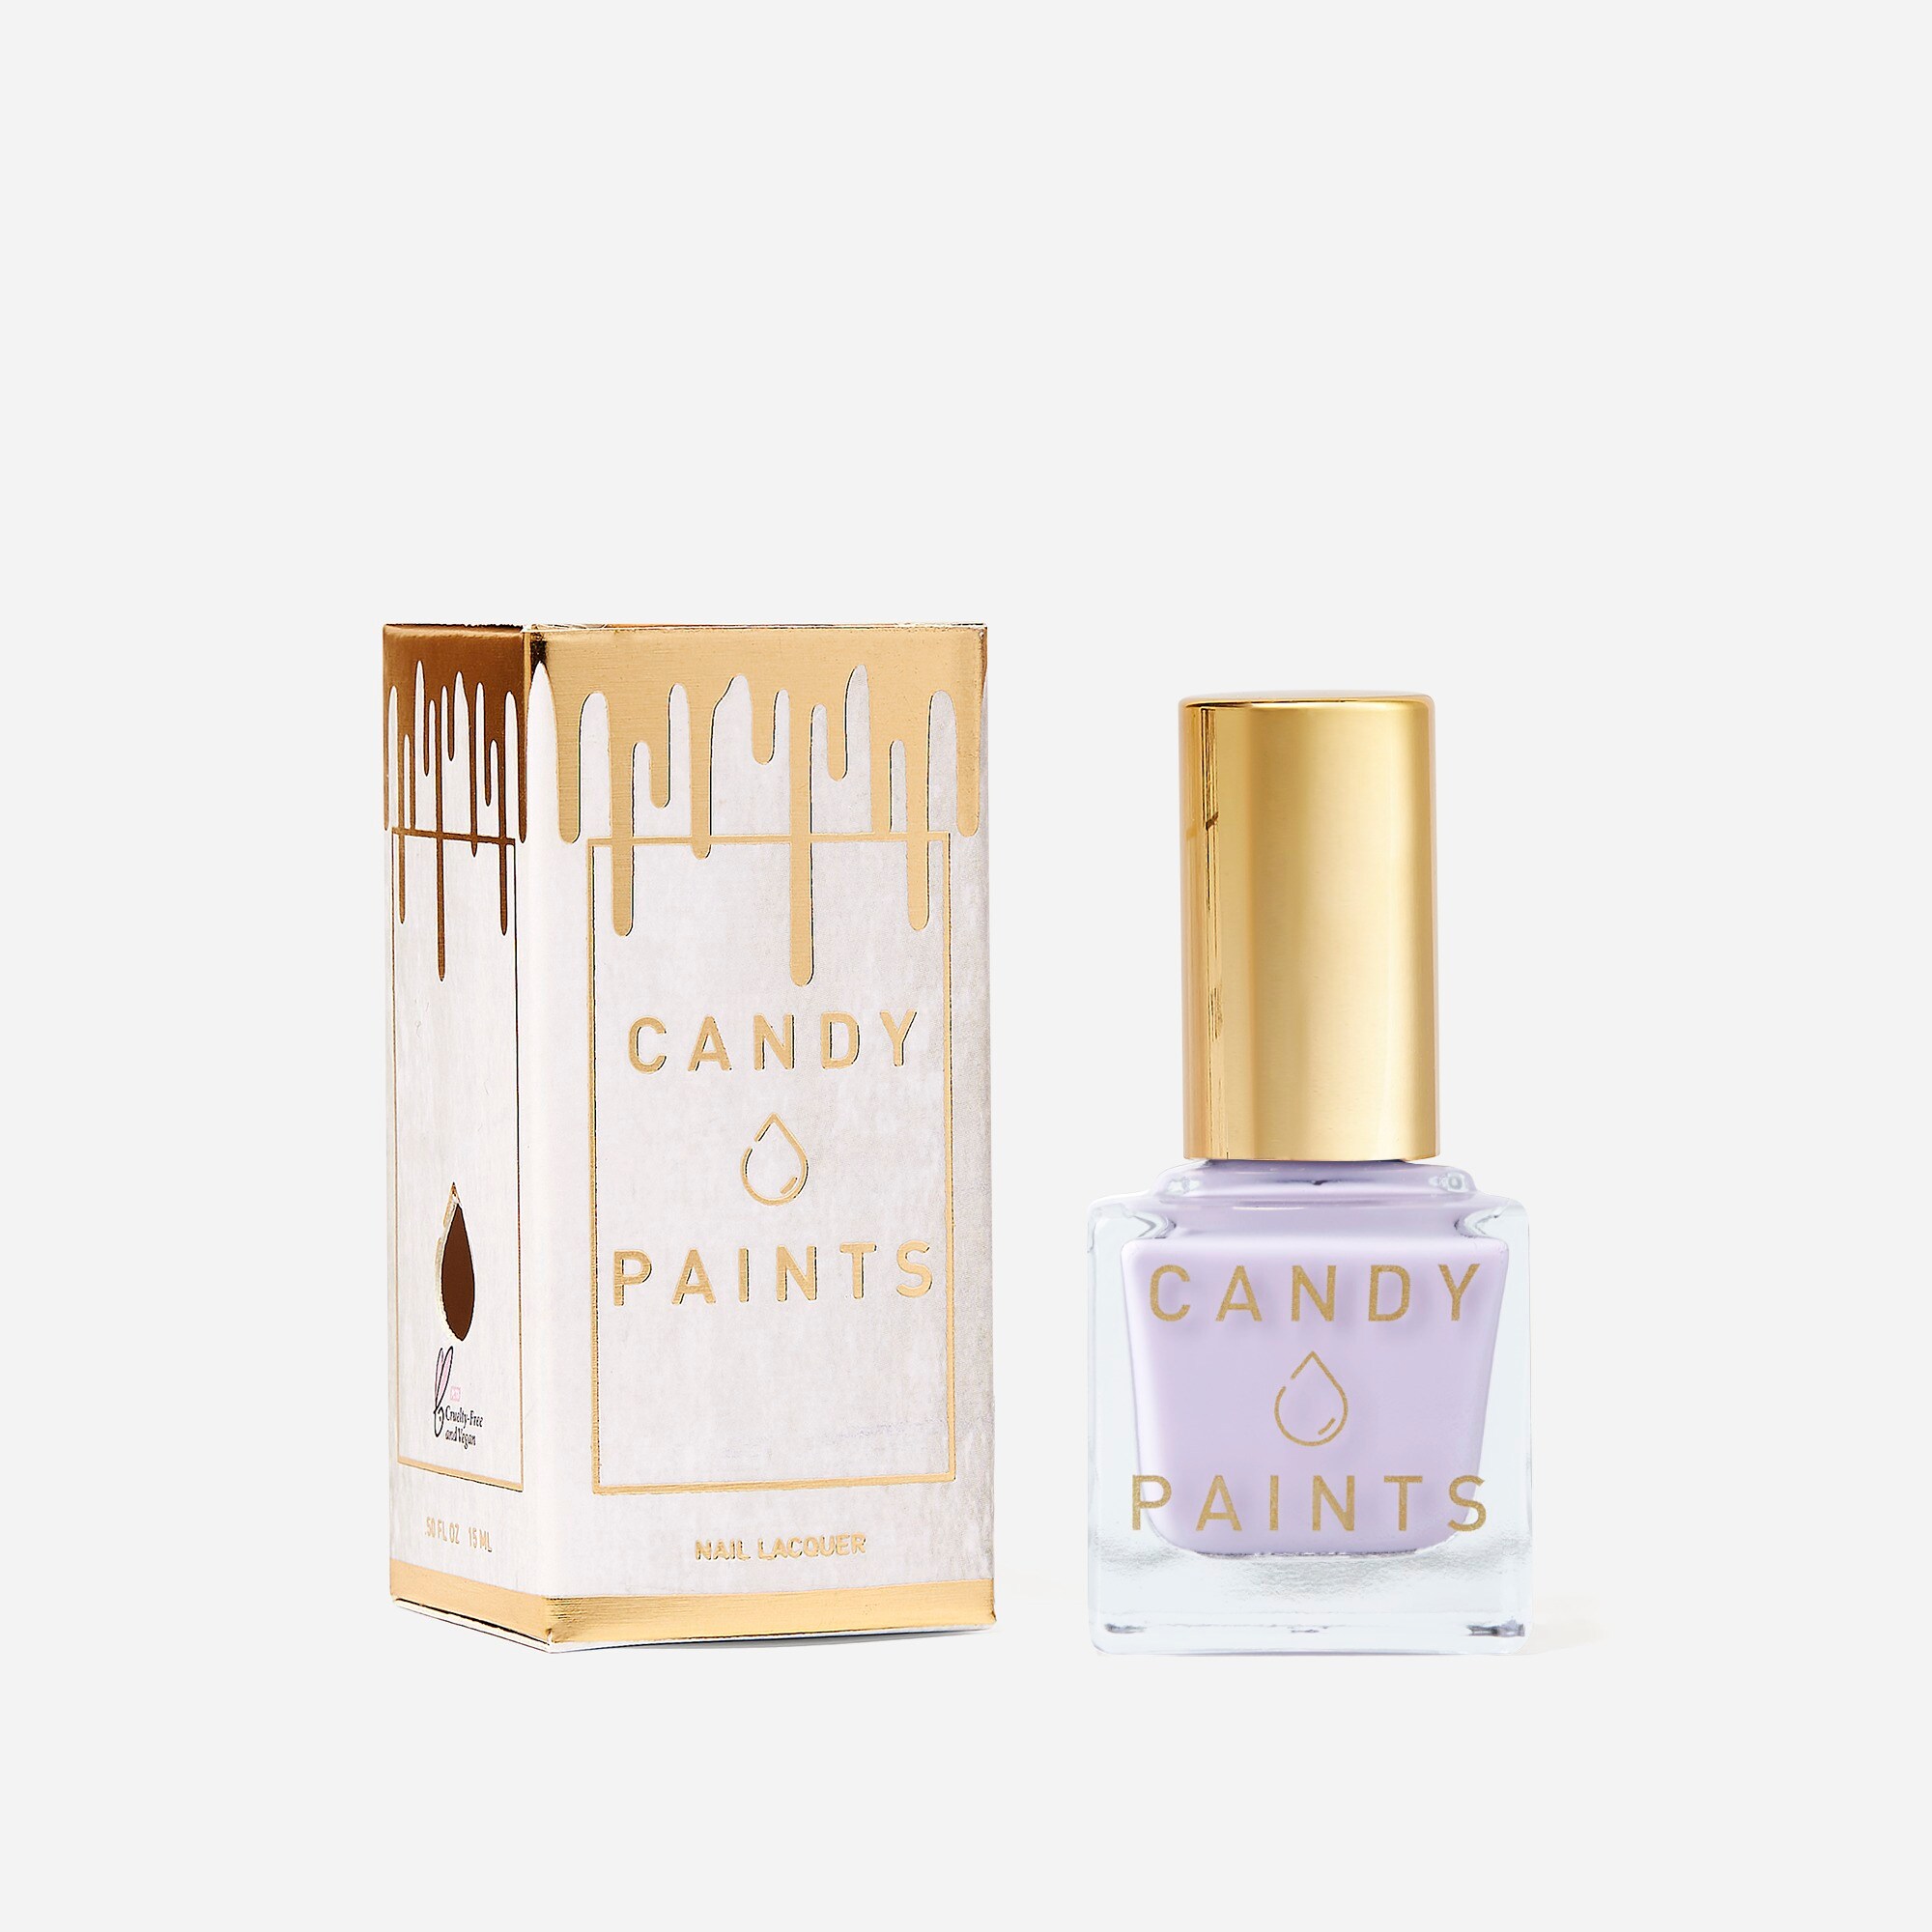  CANDY X PAINTS Hazy Nomad nail lacquer